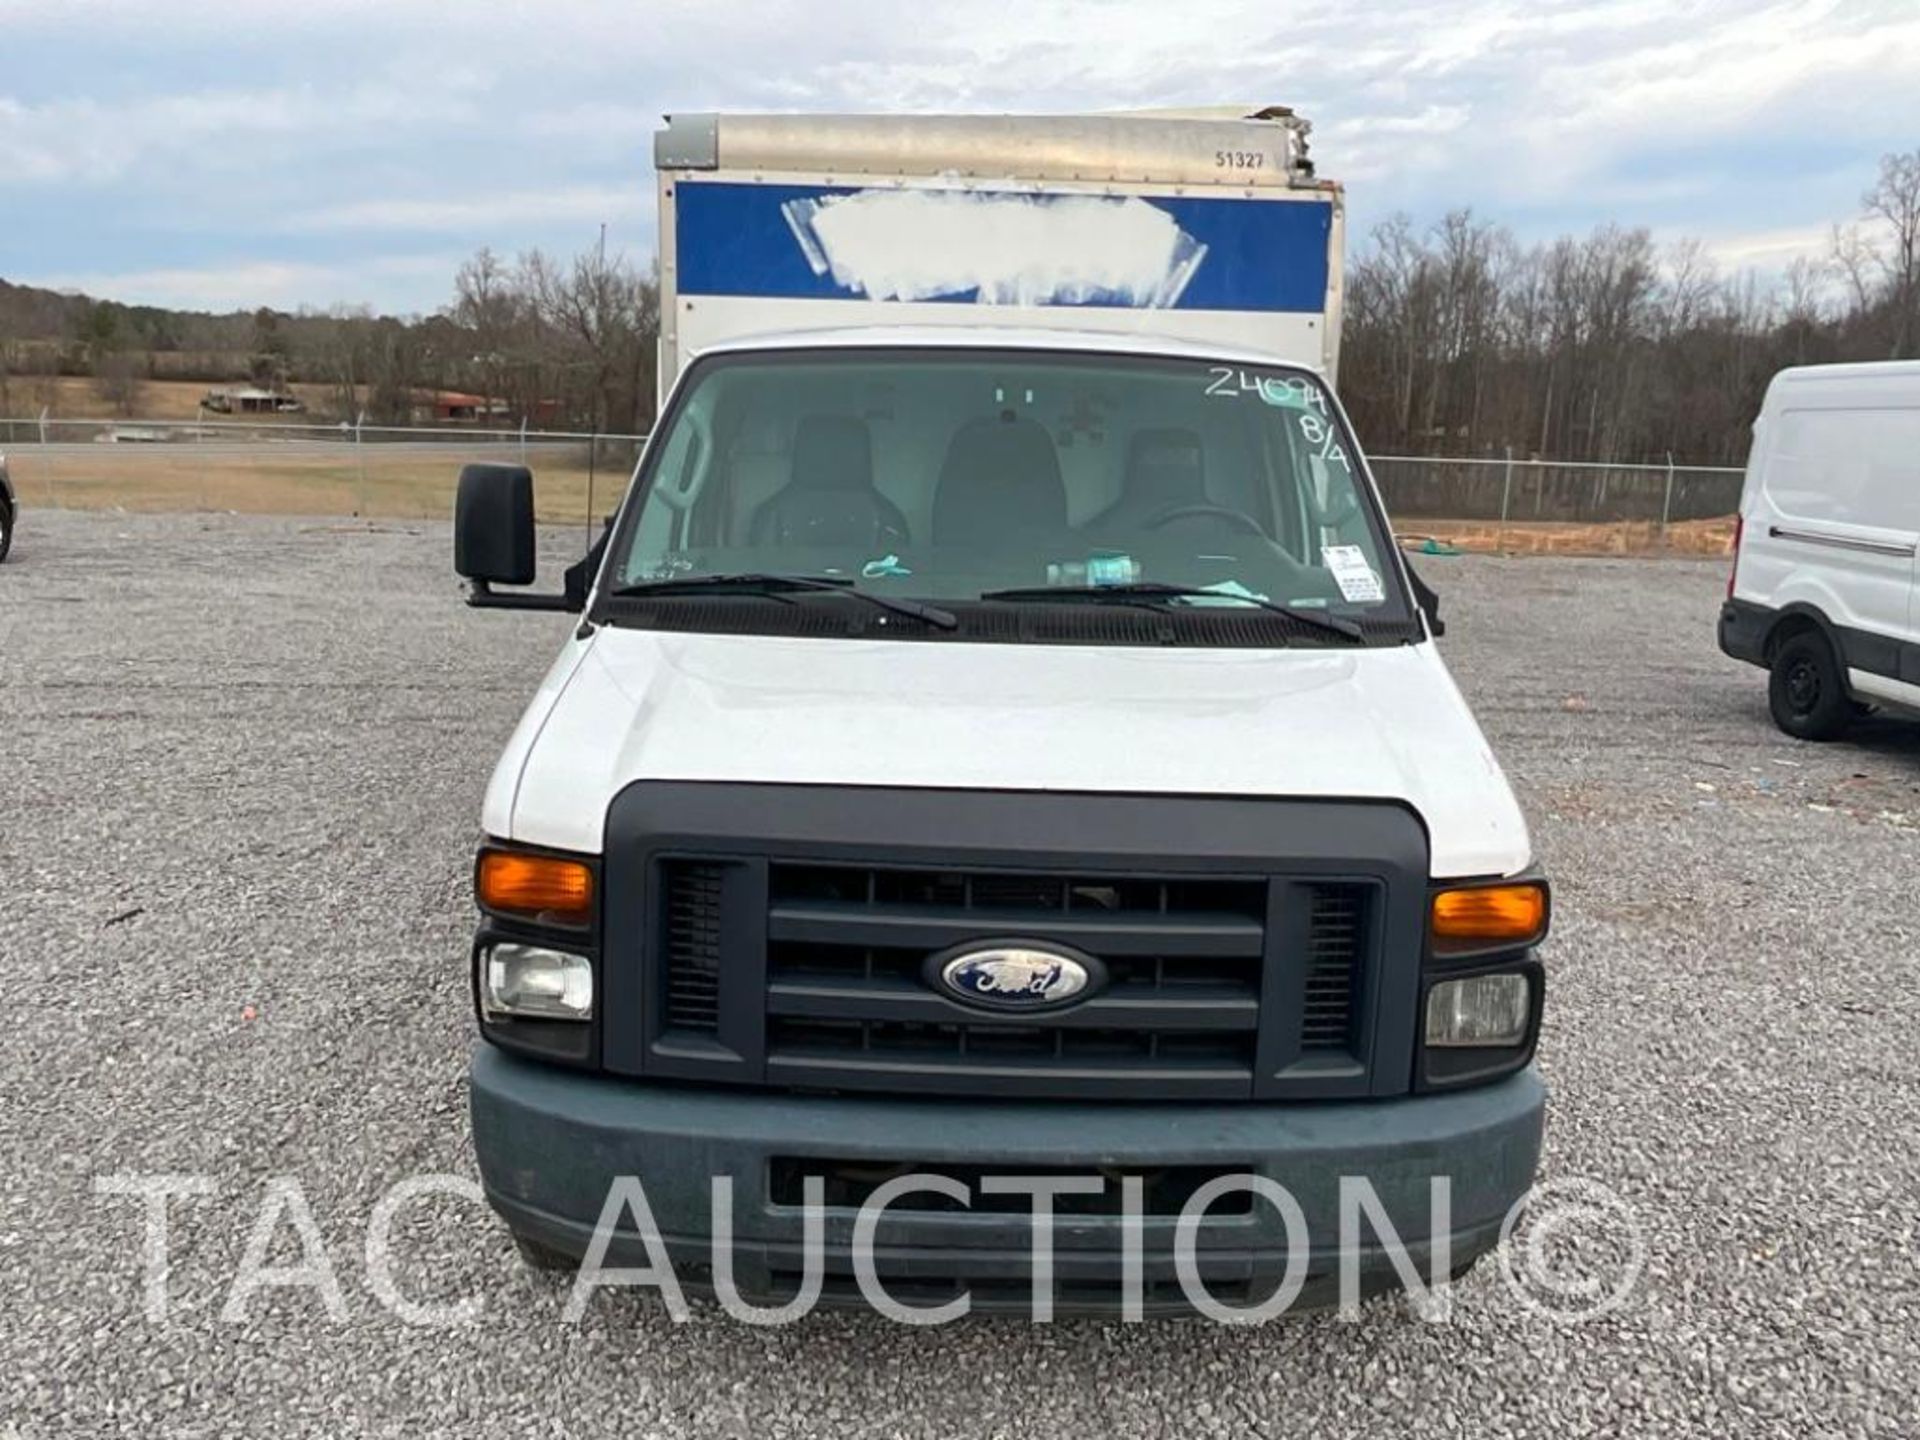 2015 Ford E-350 12ft Box Truck - Image 2 of 32